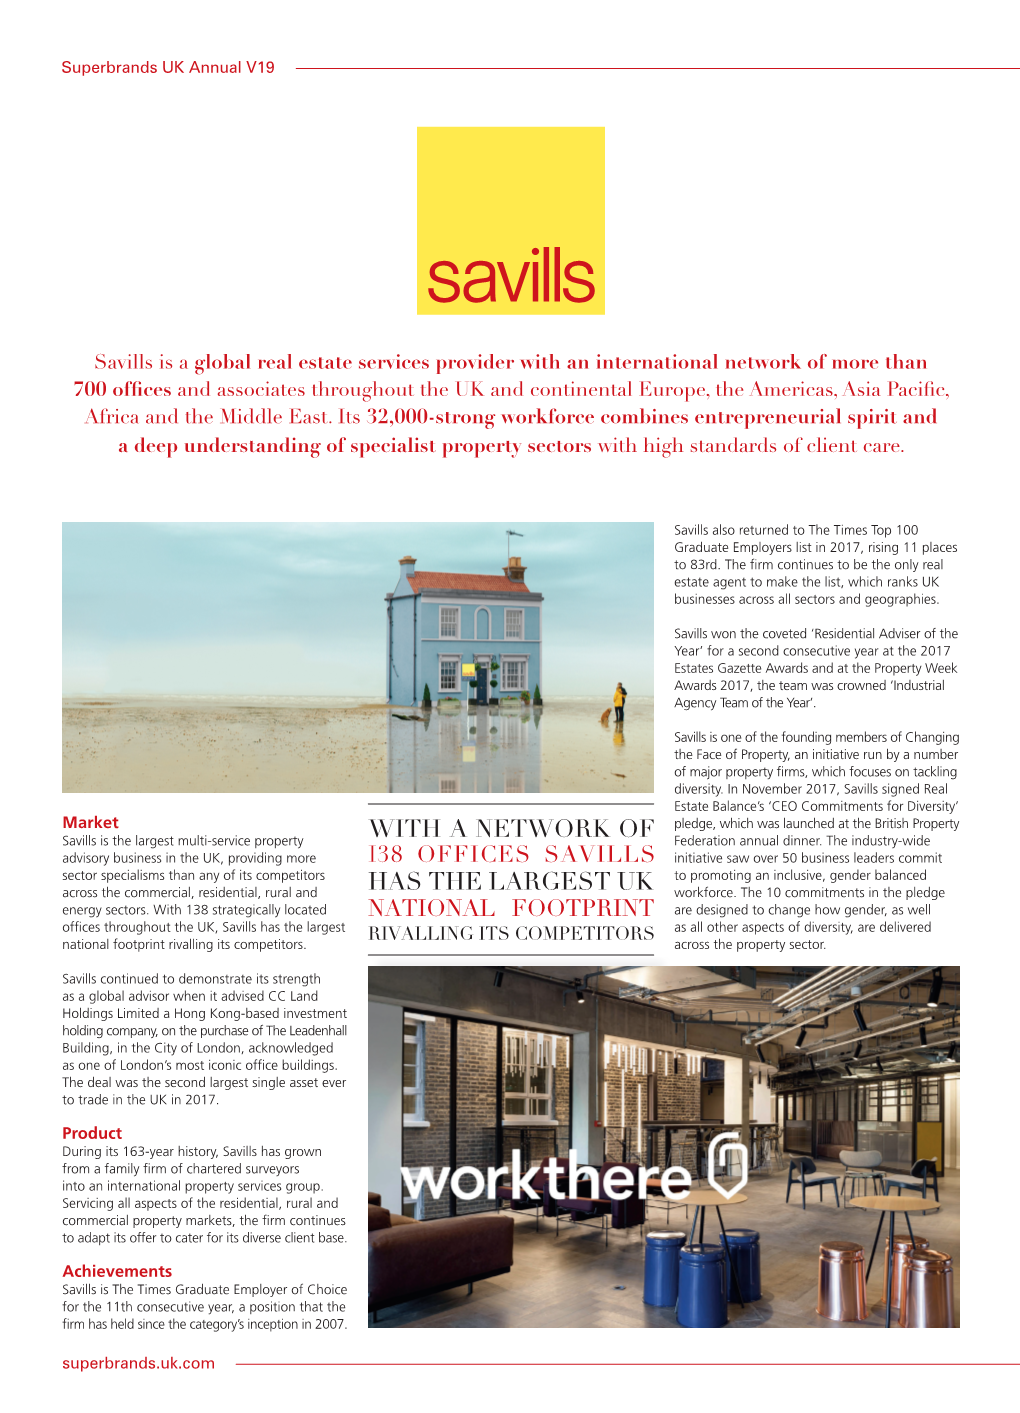 Savills Is a Global Real Estate Services Provider with an International